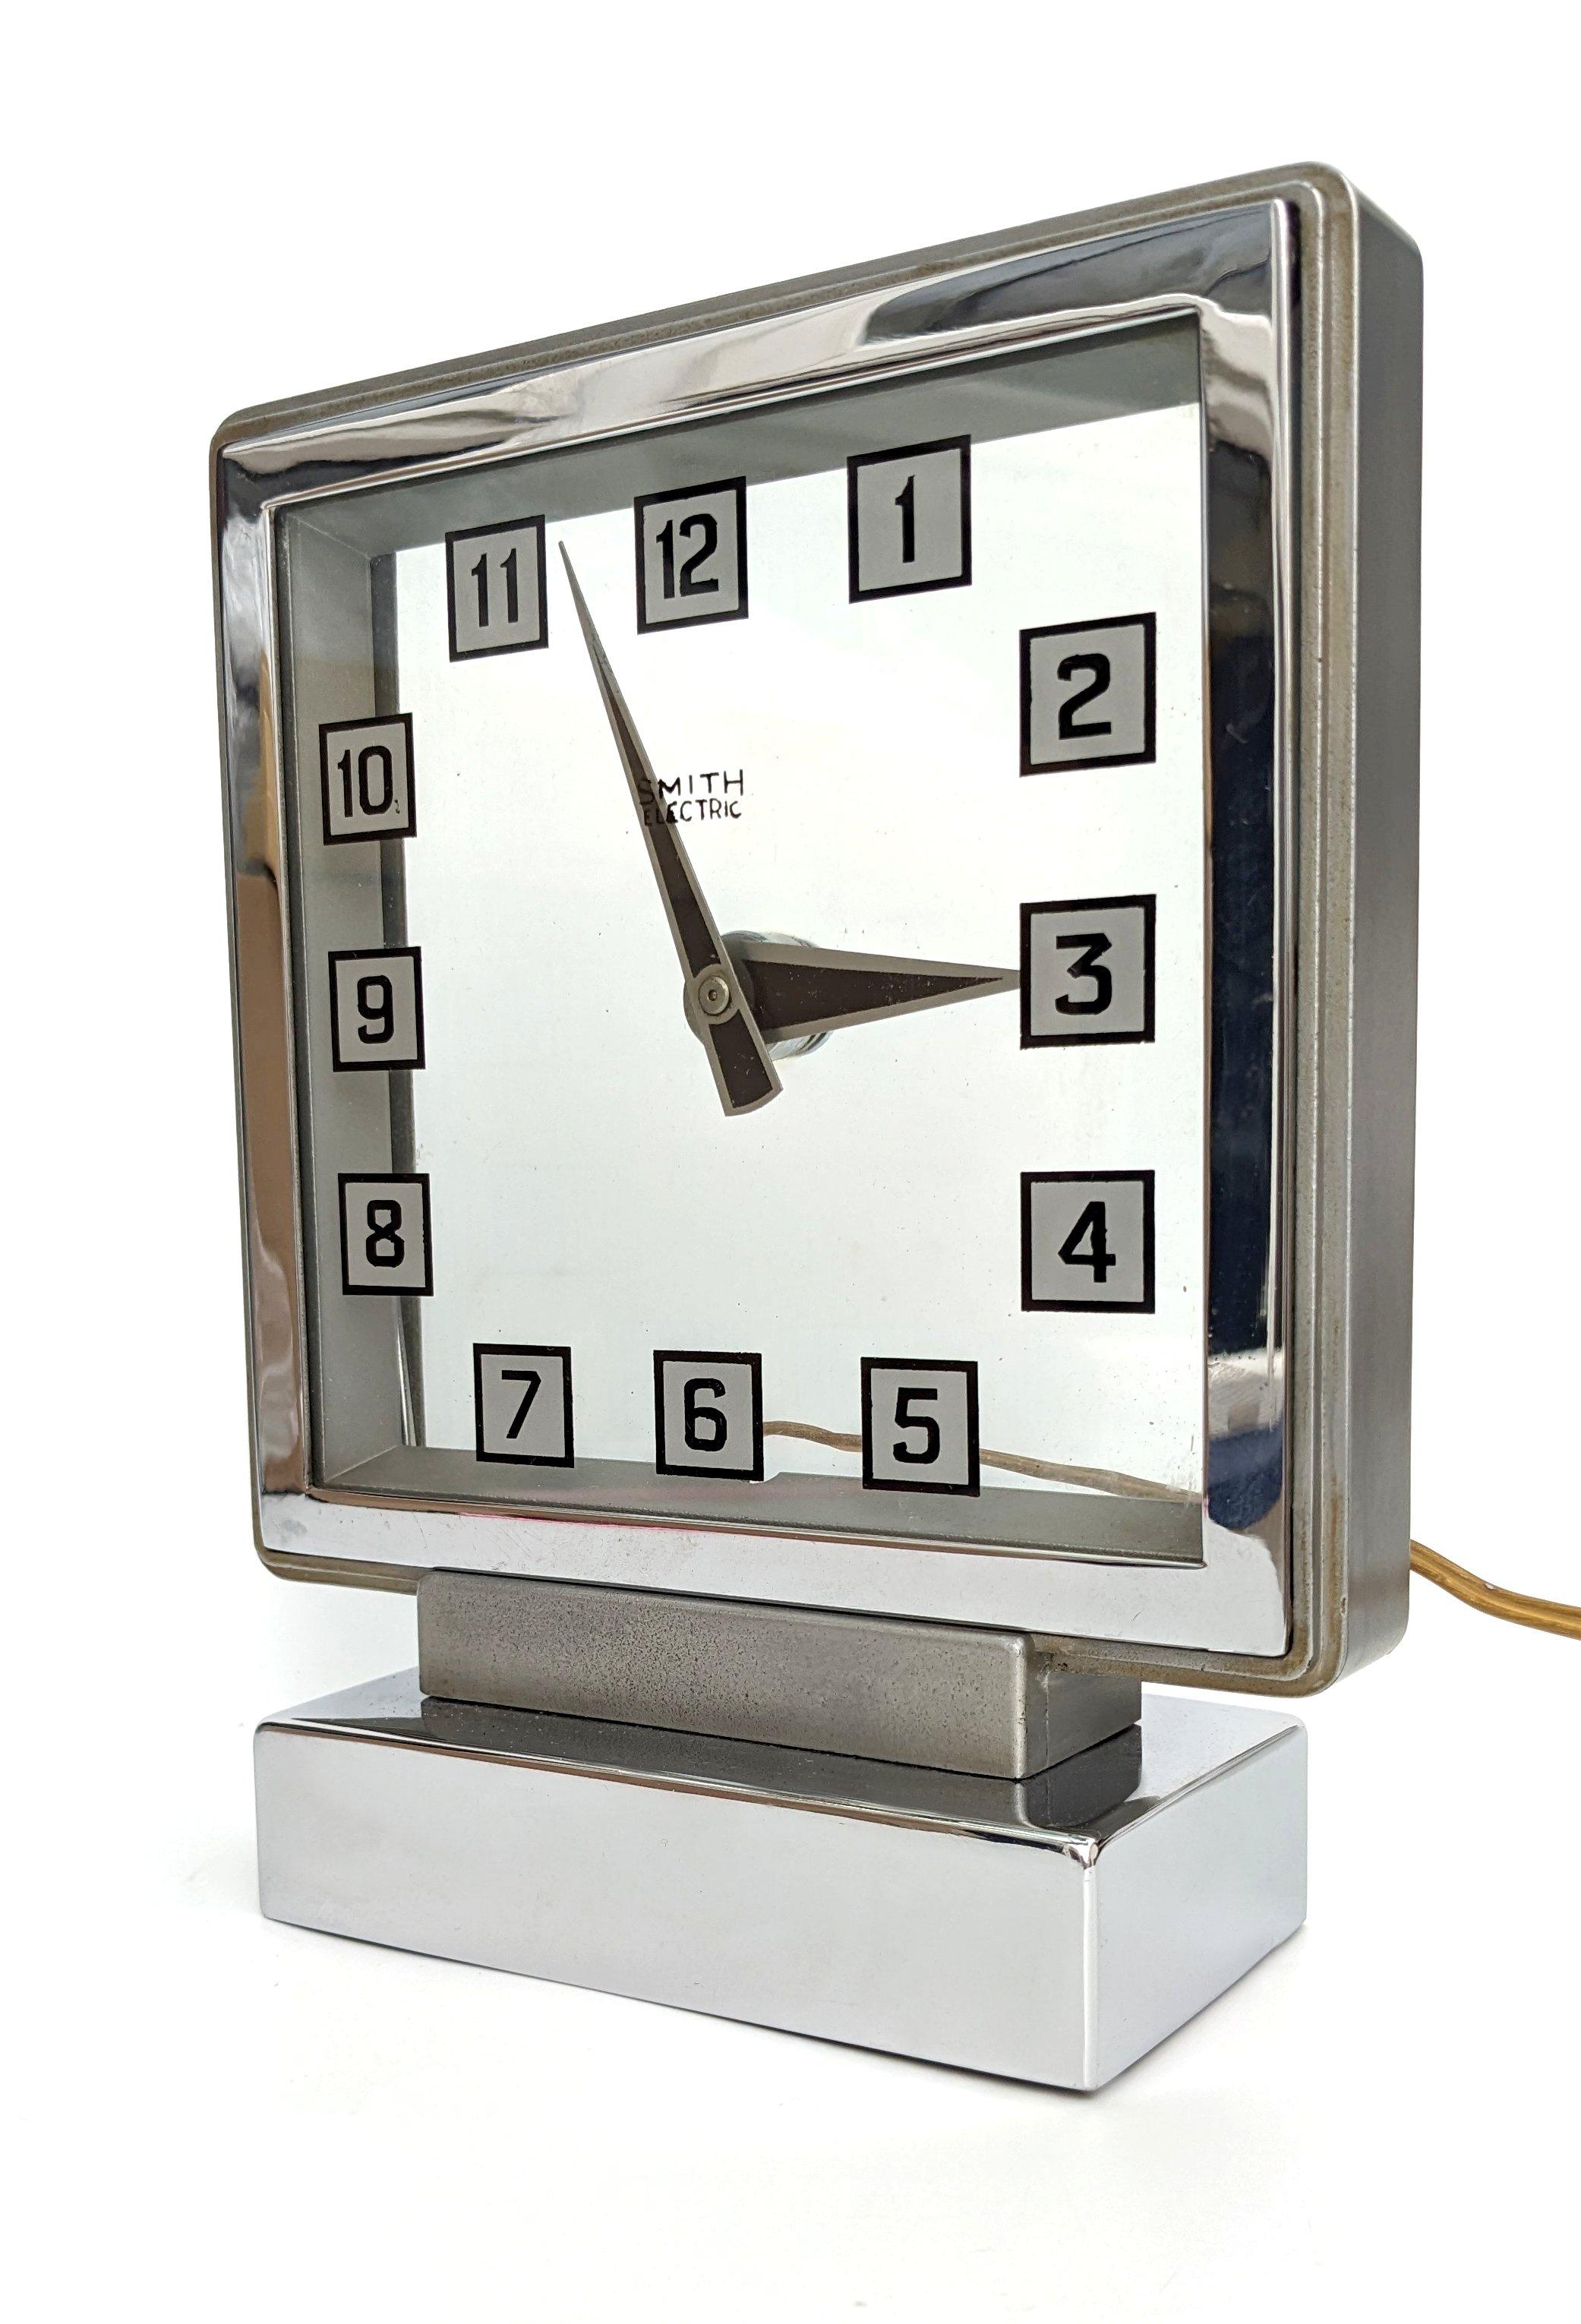 For your consideration is this rare Smith mystery clock made by Smith's Electronic Clocks . The chrome case was moulded in aluminium. The glass has black numerals on a square silver background with a black border. The rear glass holds the hand